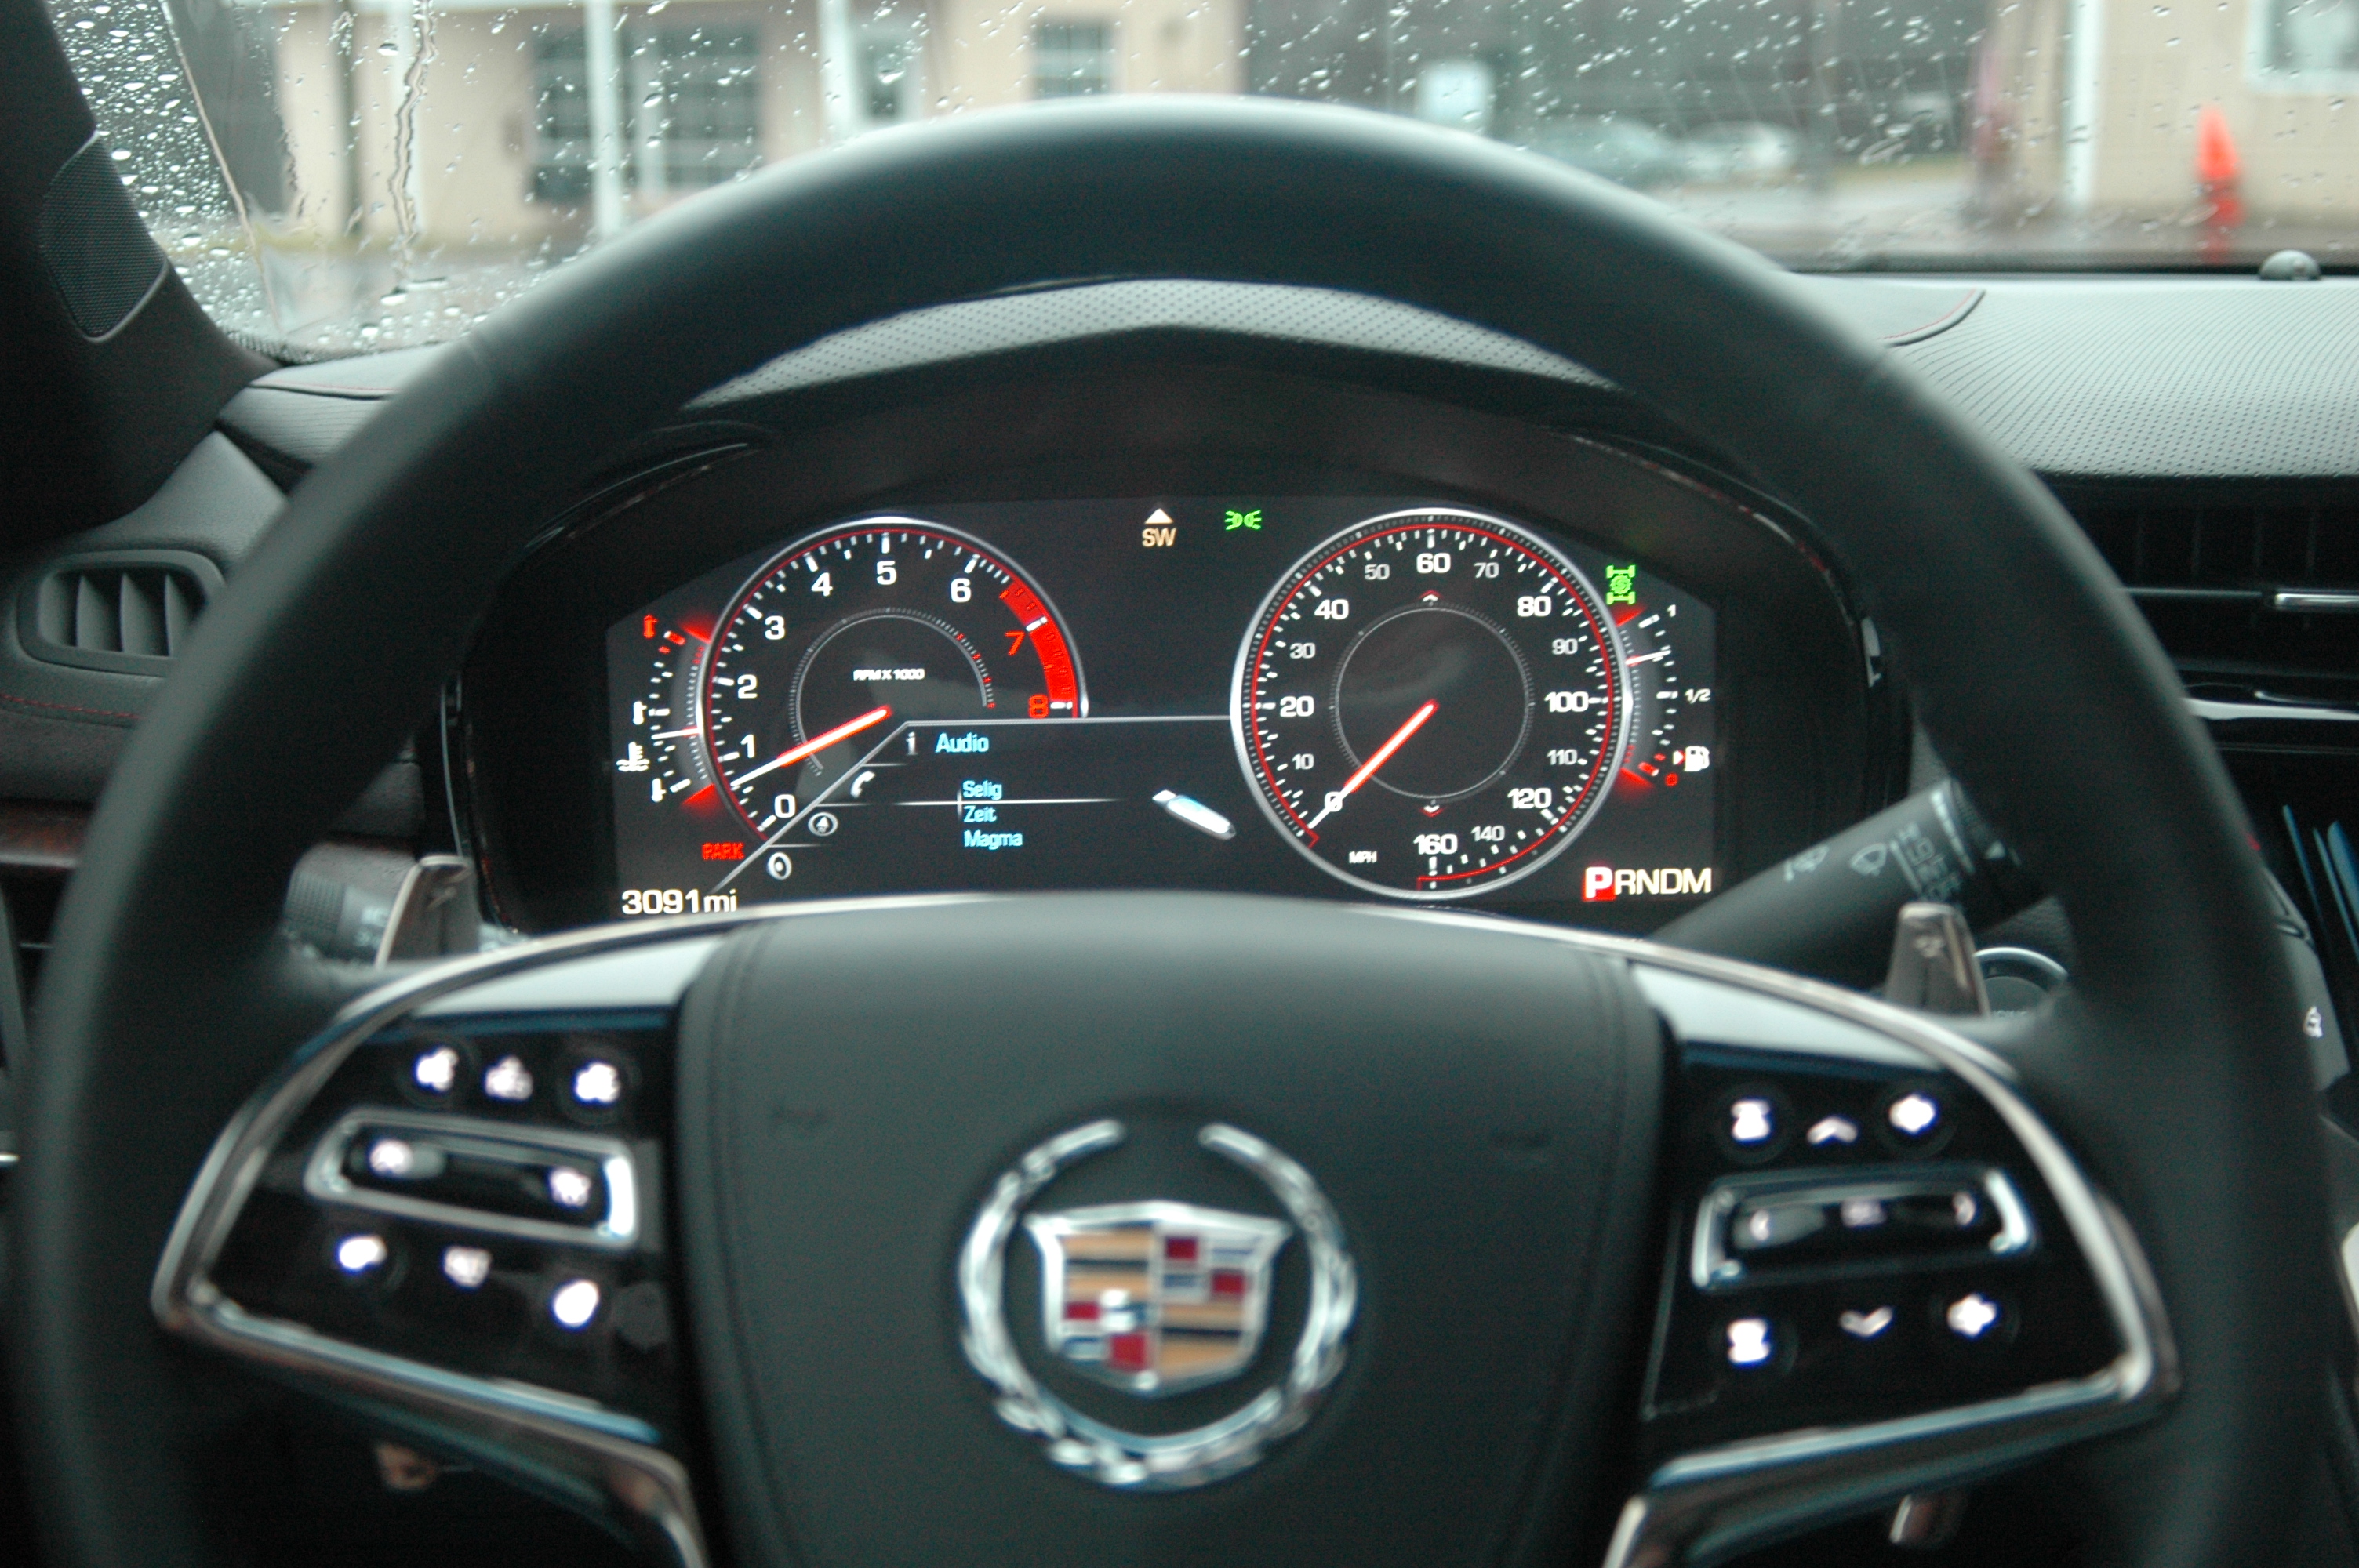 Cadillac Chronicles: The many clusters of the 2014 Cadillac CTS